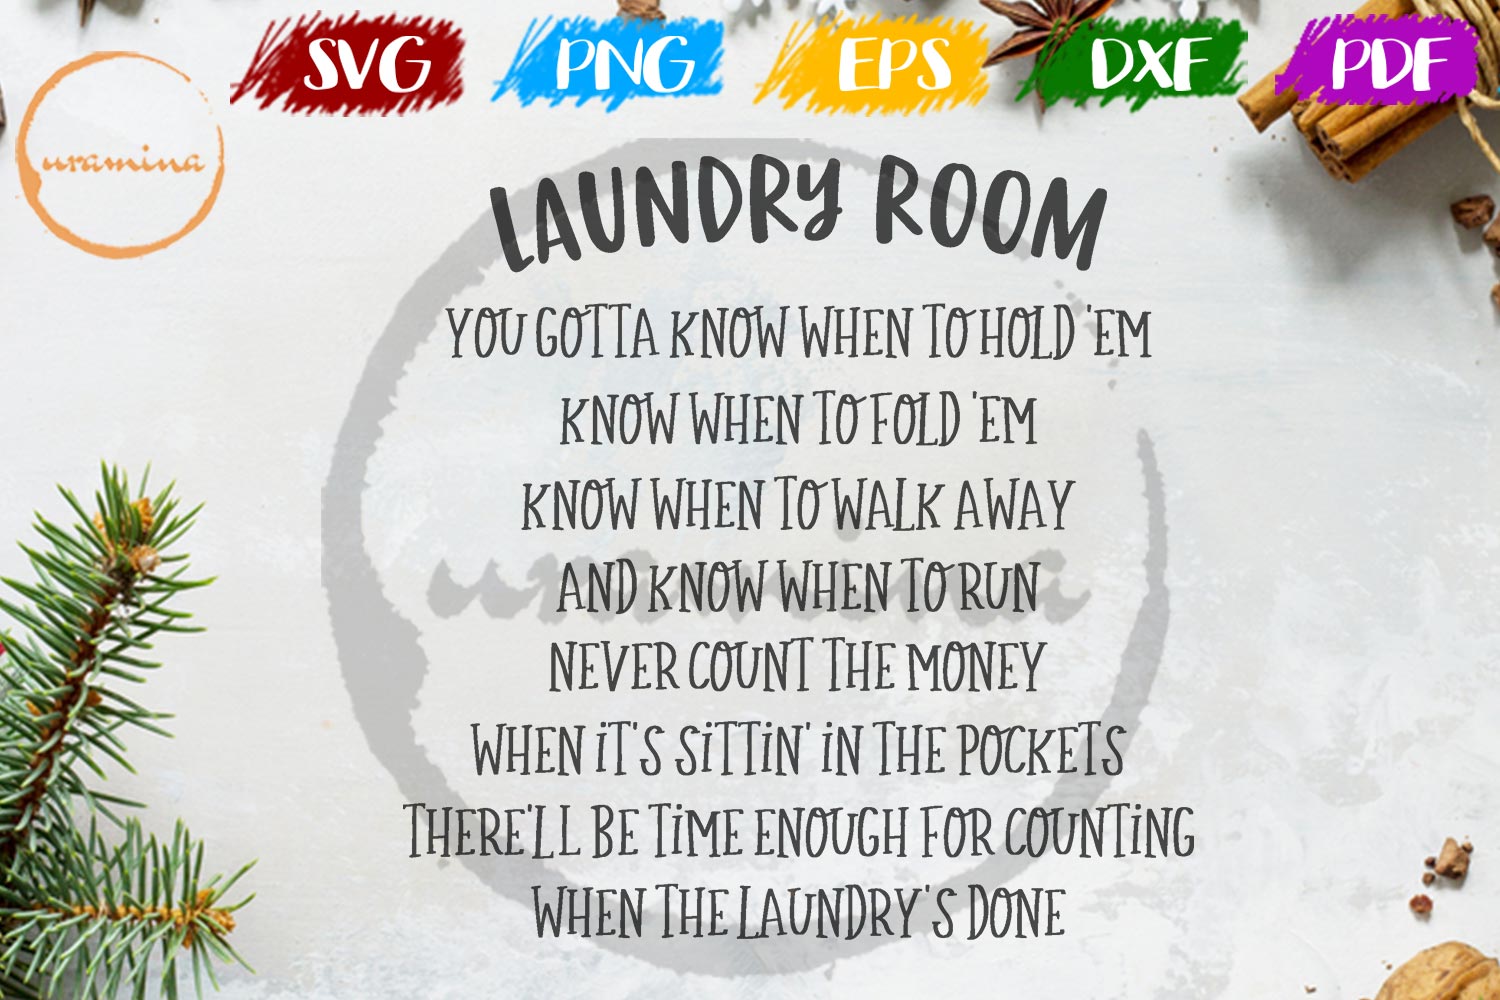 Laundry Room Rules and Guide SVG Cut Files PNG PDF DXF (175102